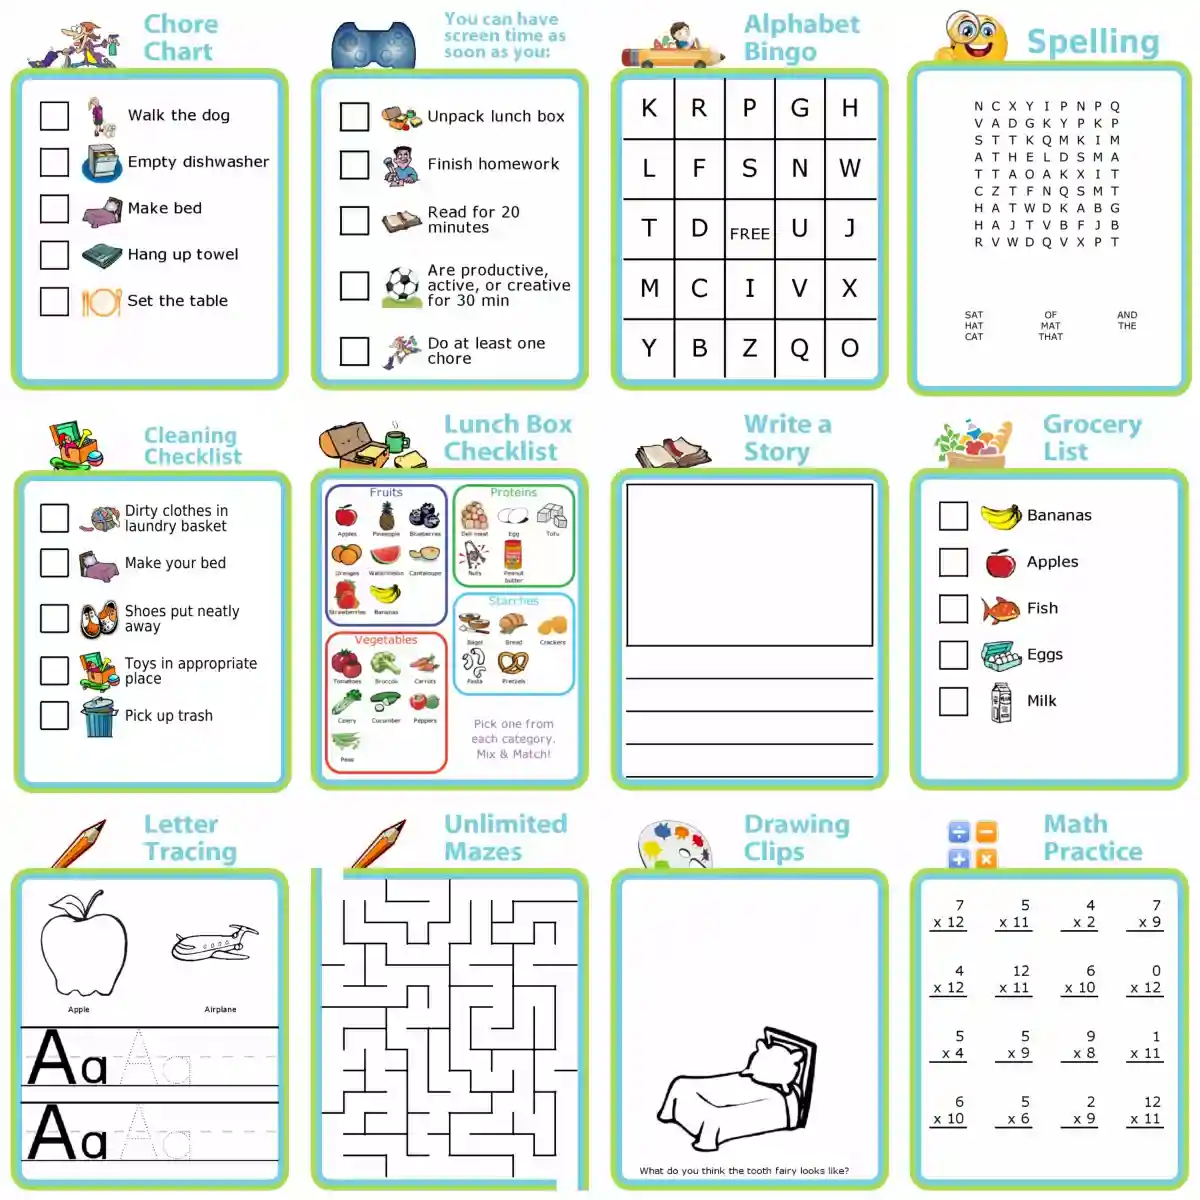 12 printable activities: picture checklists, bingo, letter tracing, mazes, word search, math practice, coloring, writing, crosswords, license plate game